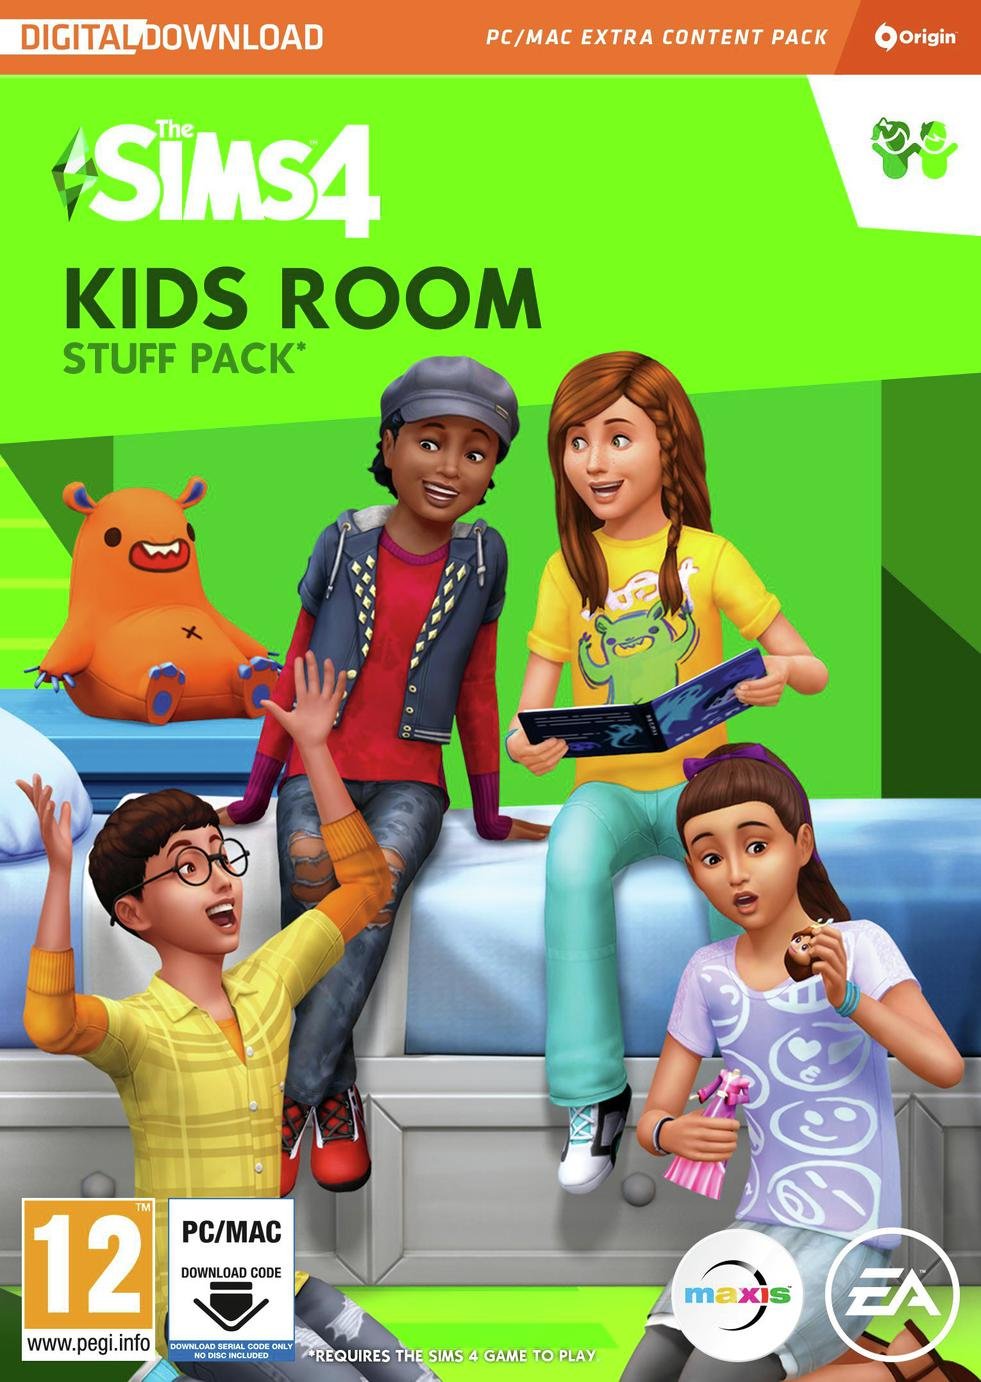 The Sims 4 Kids Room Stuff Pack PC Game